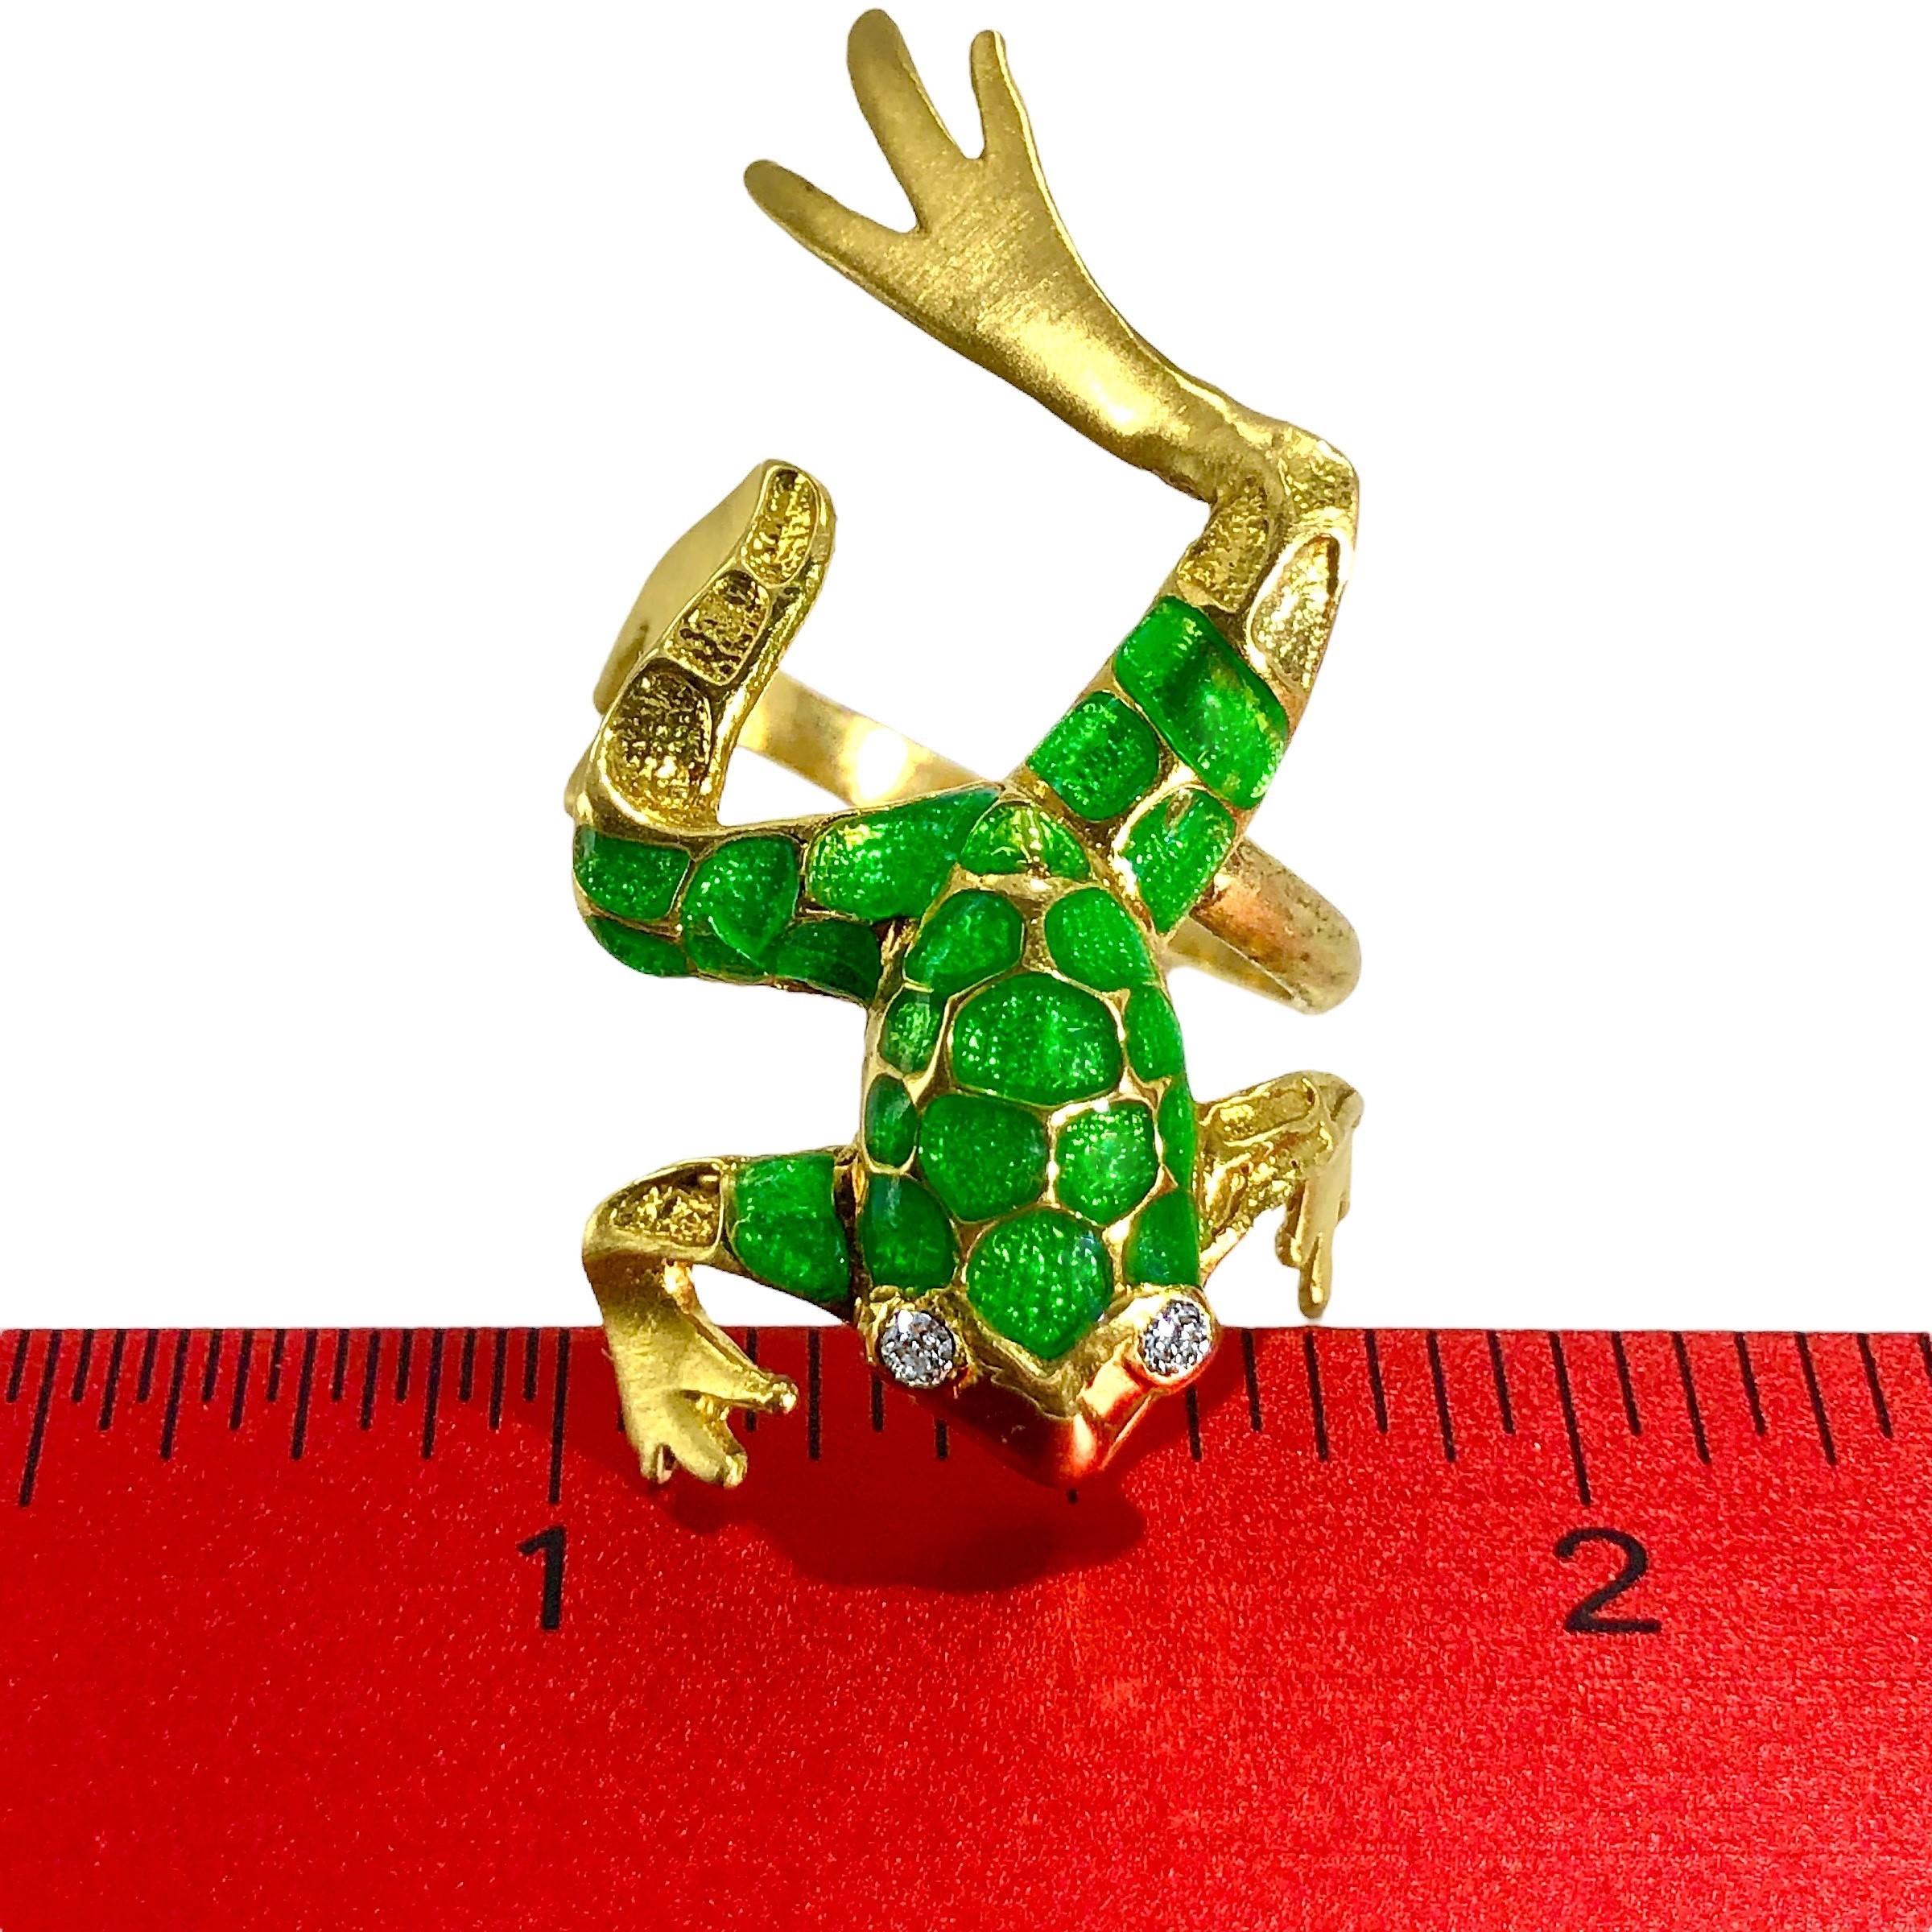 Lifelike Frog Motif Ring in 18K Yellow Gold, Green Enamel and Diamonds In Good Condition For Sale In Palm Beach, FL